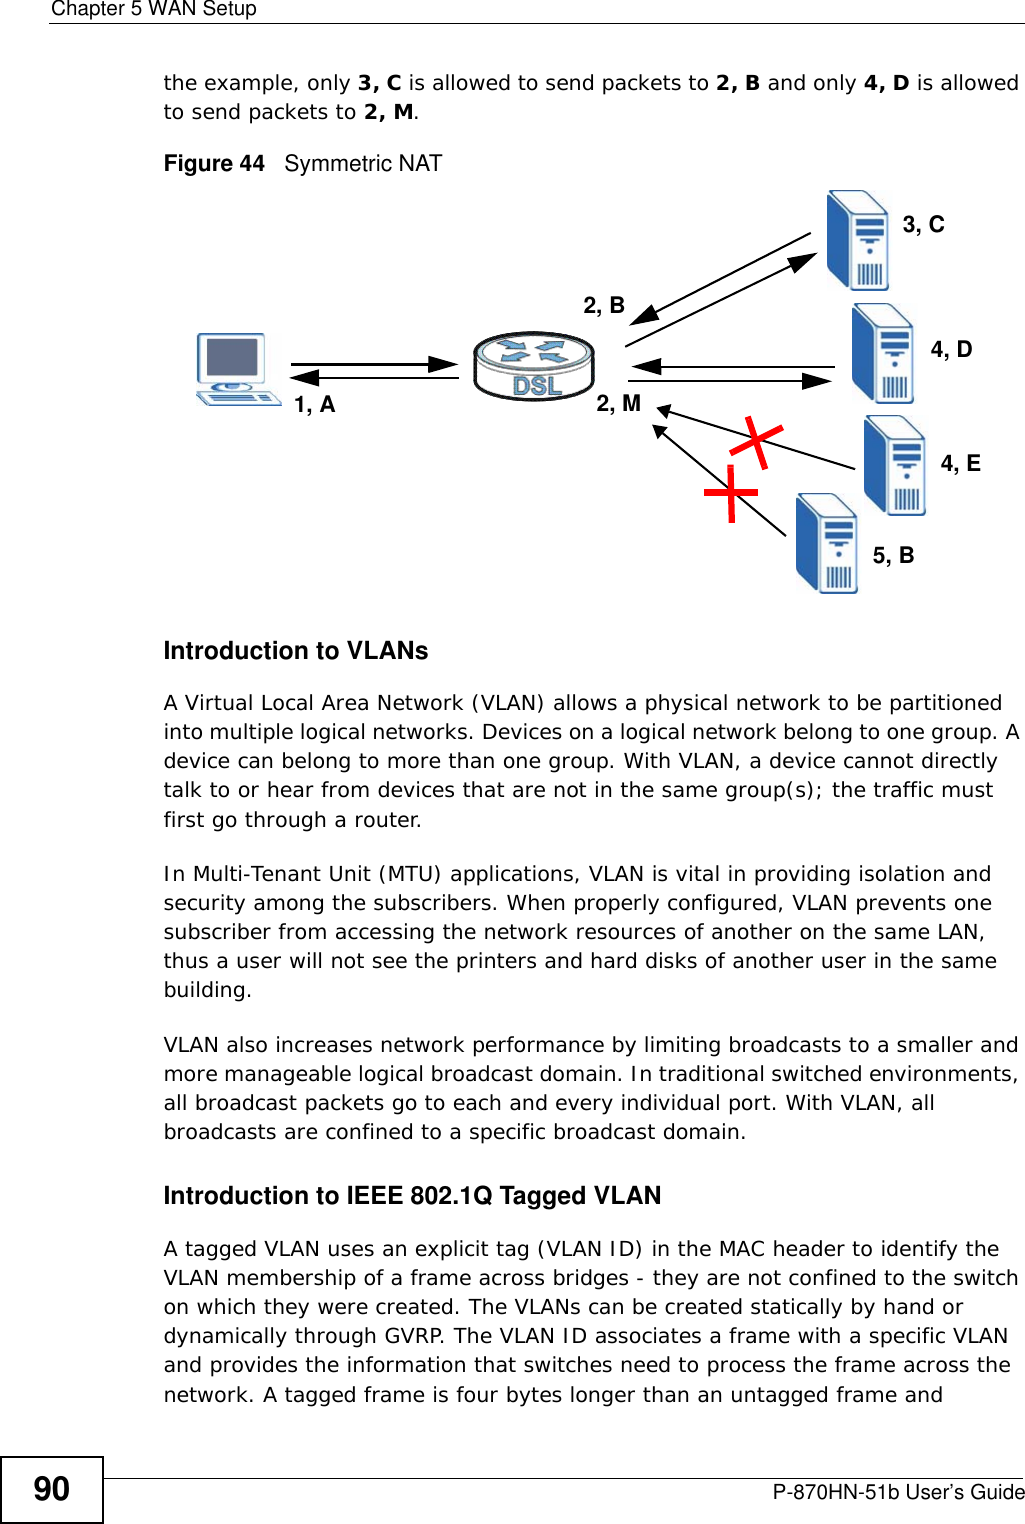 Chapter 5 WAN SetupP-870HN-51b User’s Guide90the example, only 3, C is allowed to send packets to 2, B and only 4, D is allowed to send packets to 2, M.Figure 44   Symmetric NATIntroduction to VLANs A Virtual Local Area Network (VLAN) allows a physical network to be partitioned into multiple logical networks. Devices on a logical network belong to one group. A device can belong to more than one group. With VLAN, a device cannot directly talk to or hear from devices that are not in the same group(s); the traffic must first go through a router.In Multi-Tenant Unit (MTU) applications, VLAN is vital in providing isolation and security among the subscribers. When properly configured, VLAN prevents one subscriber from accessing the network resources of another on the same LAN, thus a user will not see the printers and hard disks of another user in the same building. VLAN also increases network performance by limiting broadcasts to a smaller and more manageable logical broadcast domain. In traditional switched environments, all broadcast packets go to each and every individual port. With VLAN, all broadcasts are confined to a specific broadcast domain. Introduction to IEEE 802.1Q Tagged VLAN A tagged VLAN uses an explicit tag (VLAN ID) in the MAC header to identify the VLAN membership of a frame across bridges - they are not confined to the switch on which they were created. The VLANs can be created statically by hand or dynamically through GVRP. The VLAN ID associates a frame with a specific VLAN and provides the information that switches need to process the frame across the network. A tagged frame is four bytes longer than an untagged frame and 1, A 2, M2, B4, D4, E3, C5, B